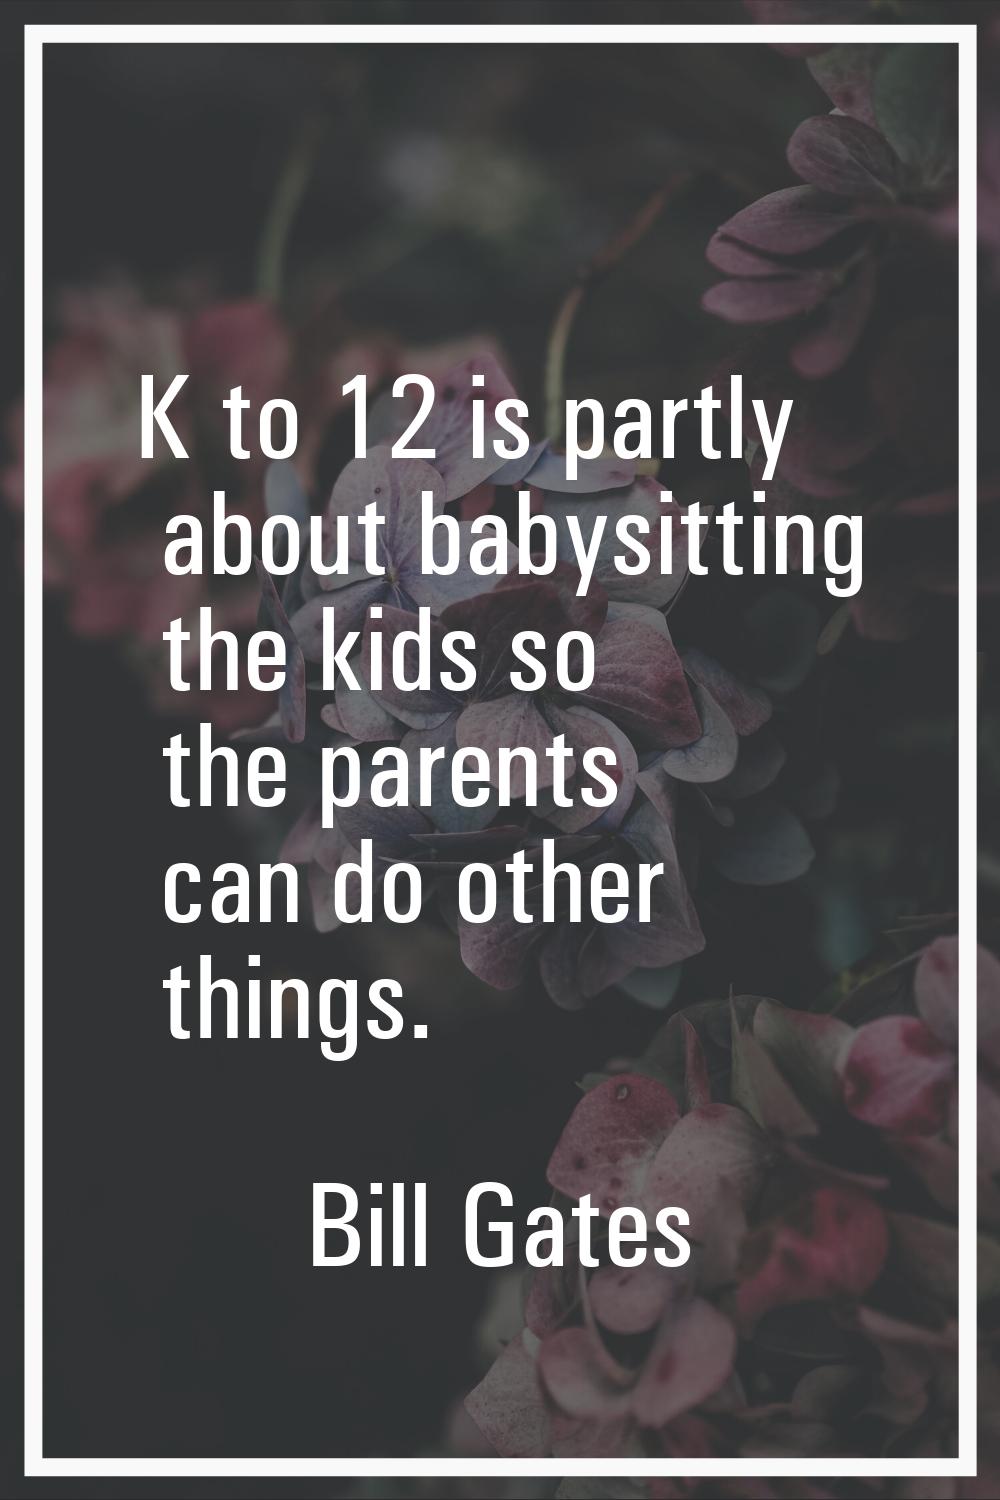 K to 12 is partly about babysitting the kids so the parents can do other things.